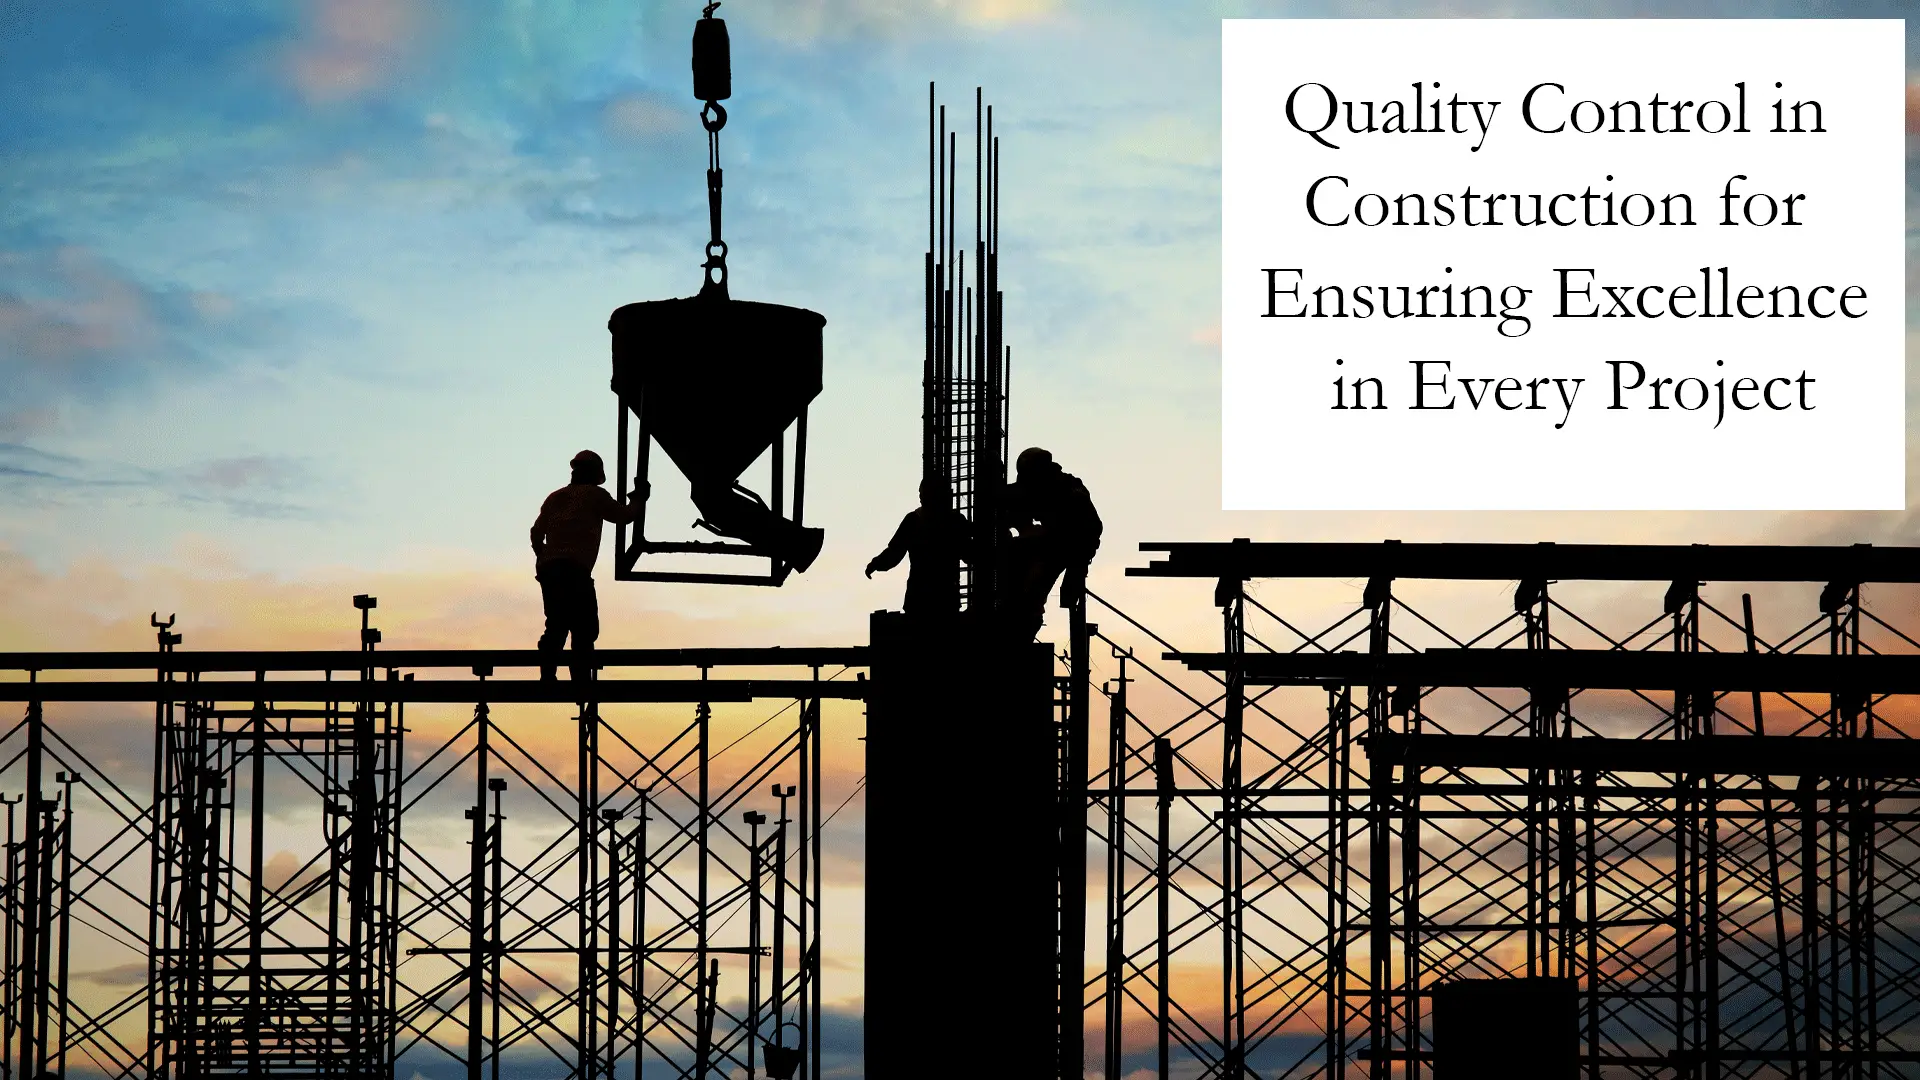 Construction Process - Quality Control for Ensuring Excellence